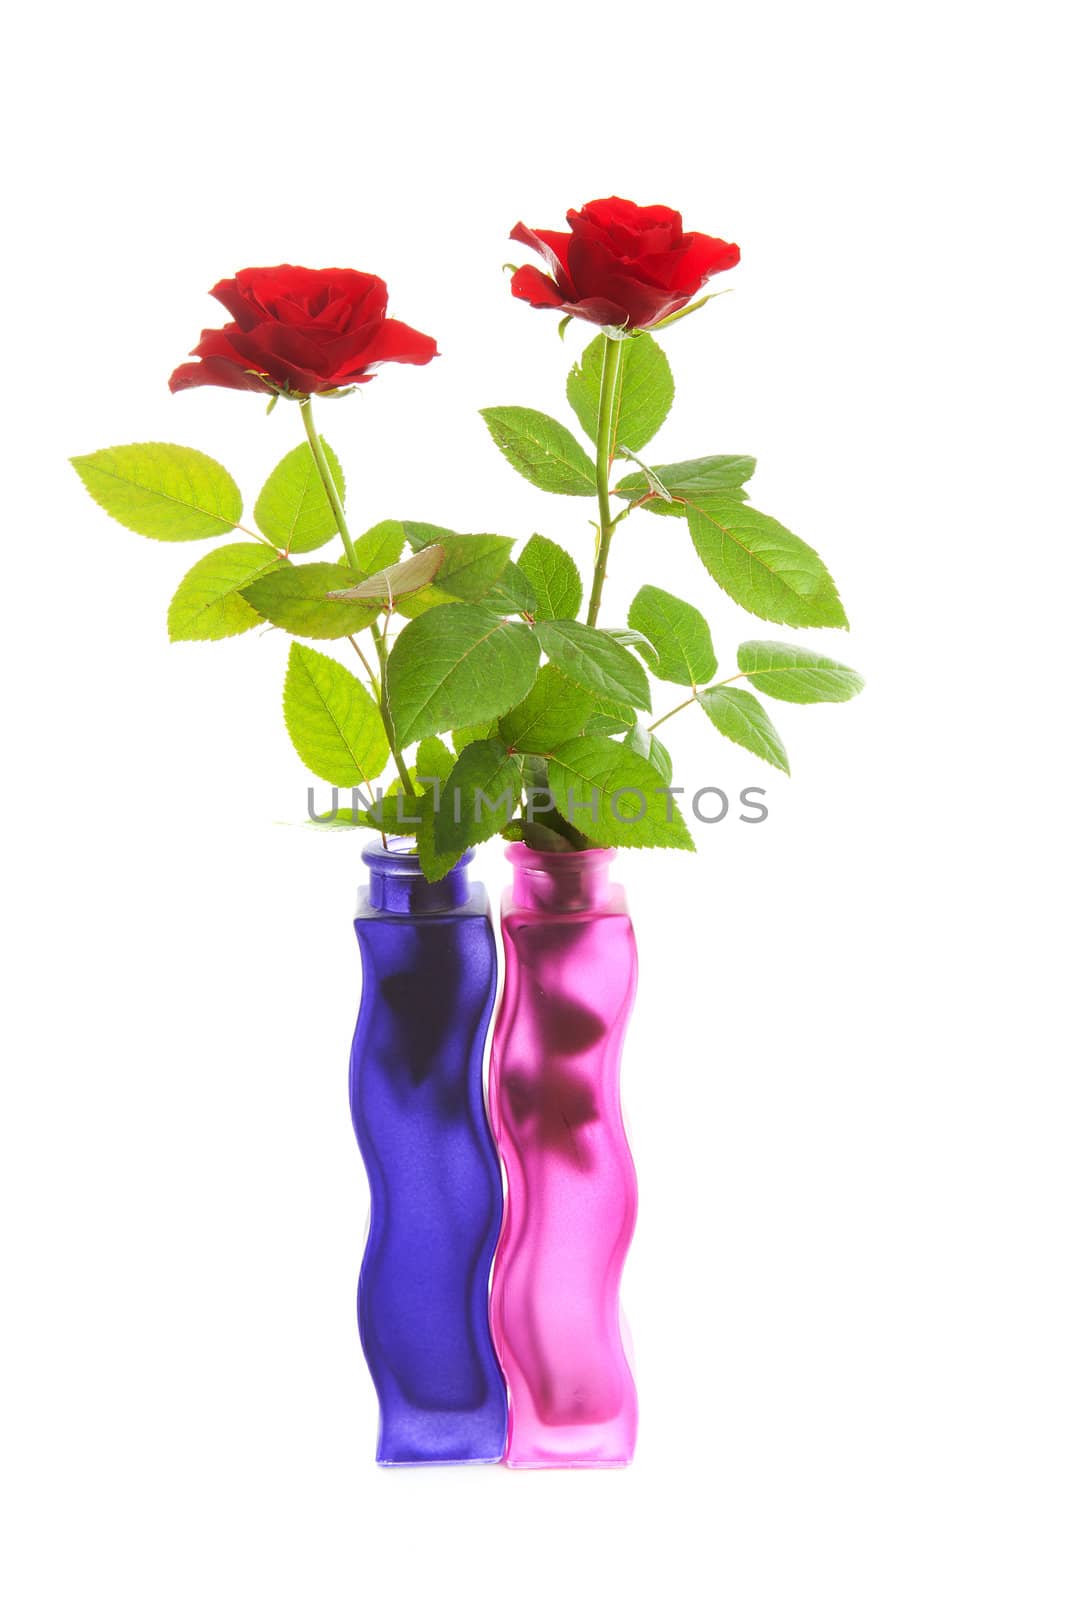 Two red roses in colorful vases by sannie32